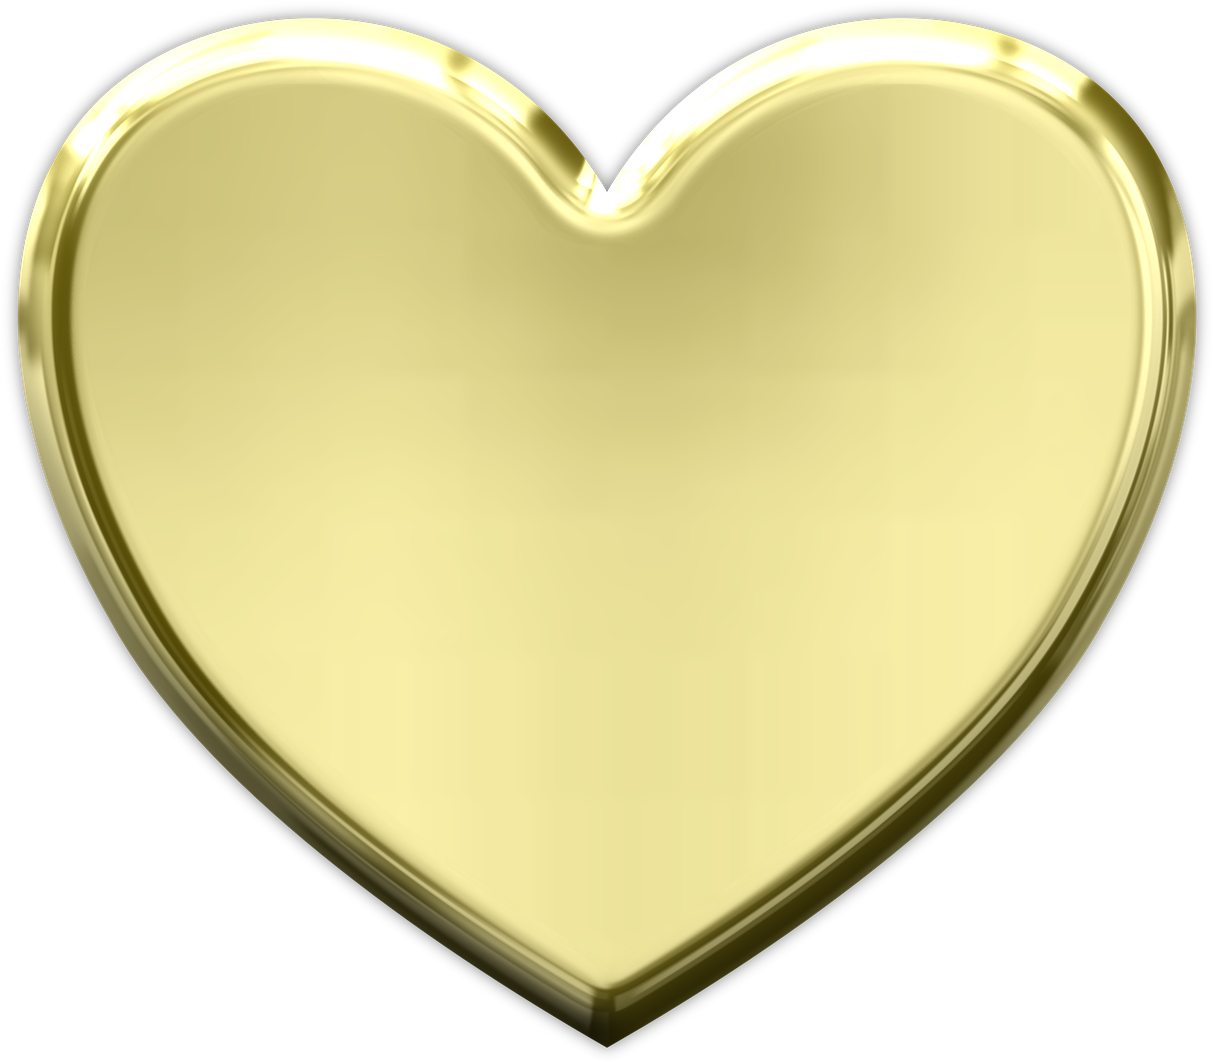 Heart Abstract Gold Photos PNG Image High Quality PNG Image